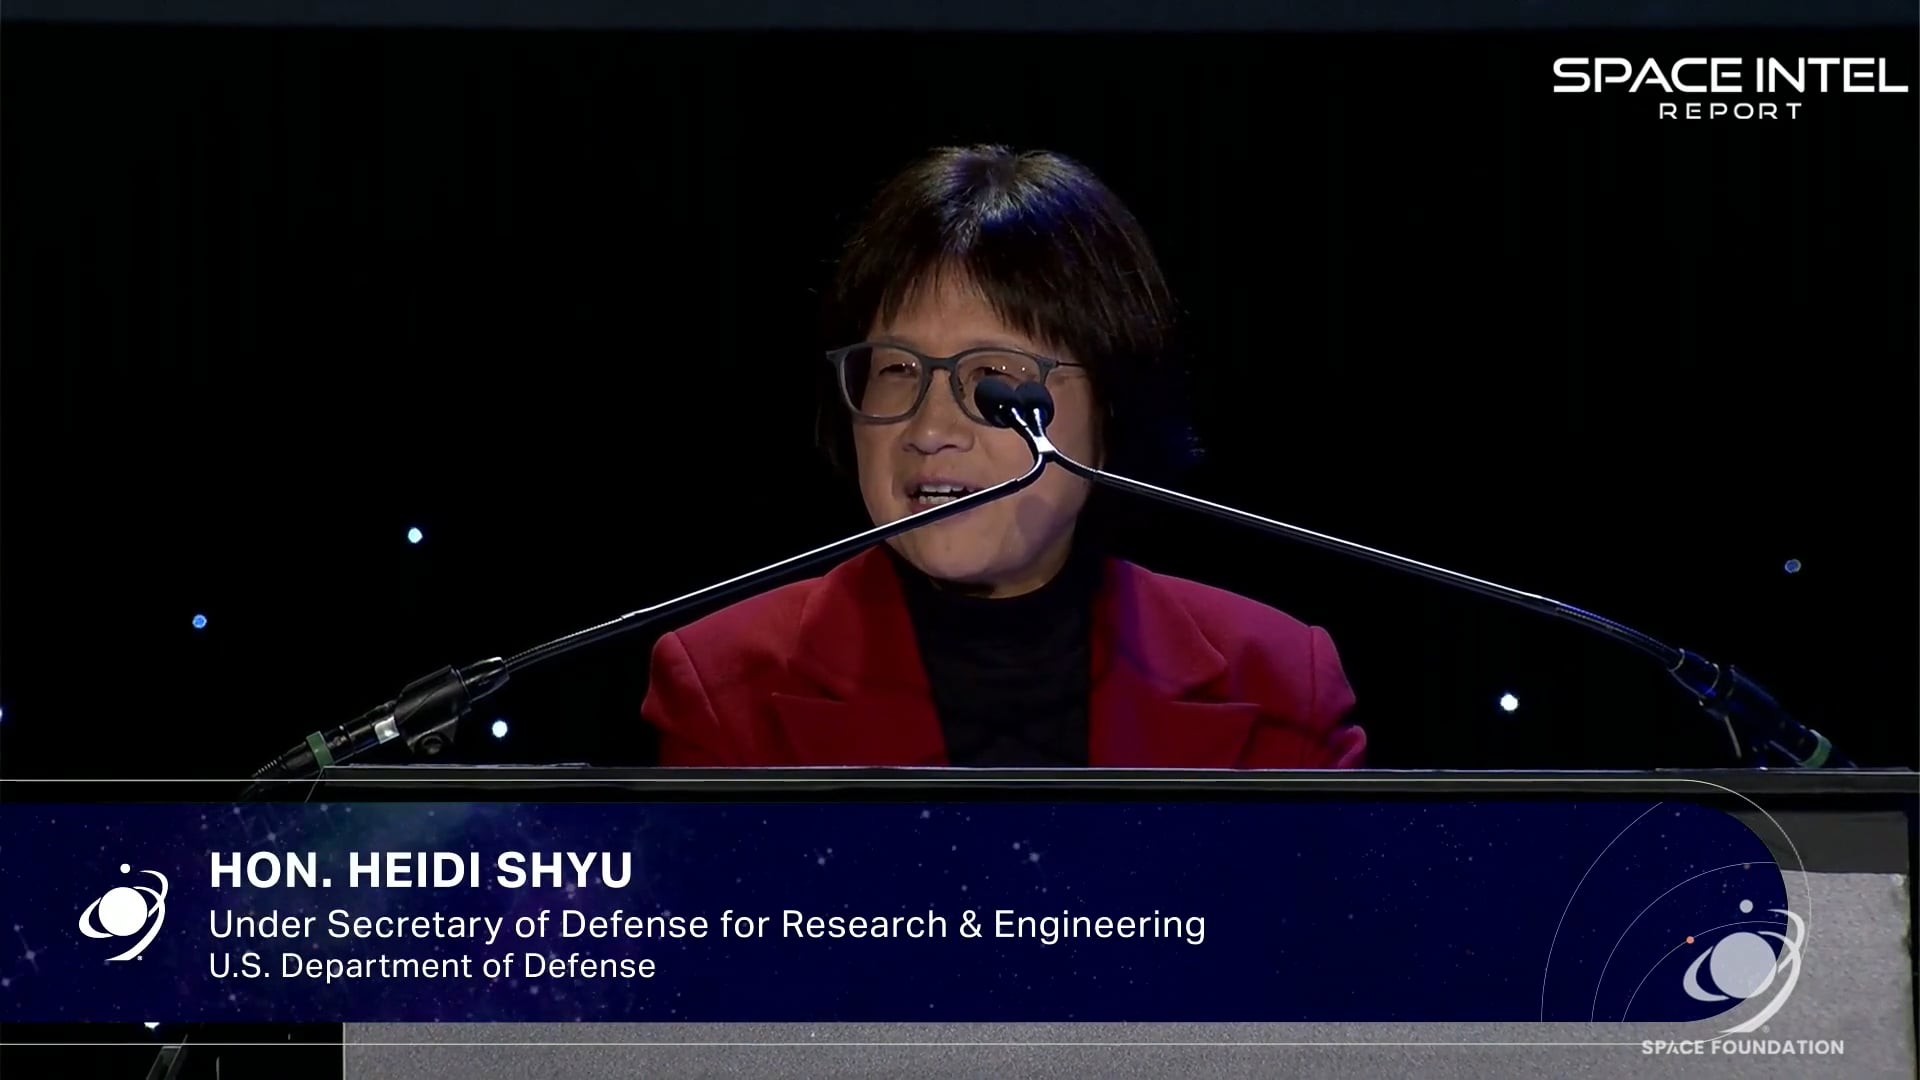 Undersecretary of Defense Heidi Shyu, says that the Pentagon needs to lean more heavily on commercial innovations in orbit to keep pace with rivals Russia and China.